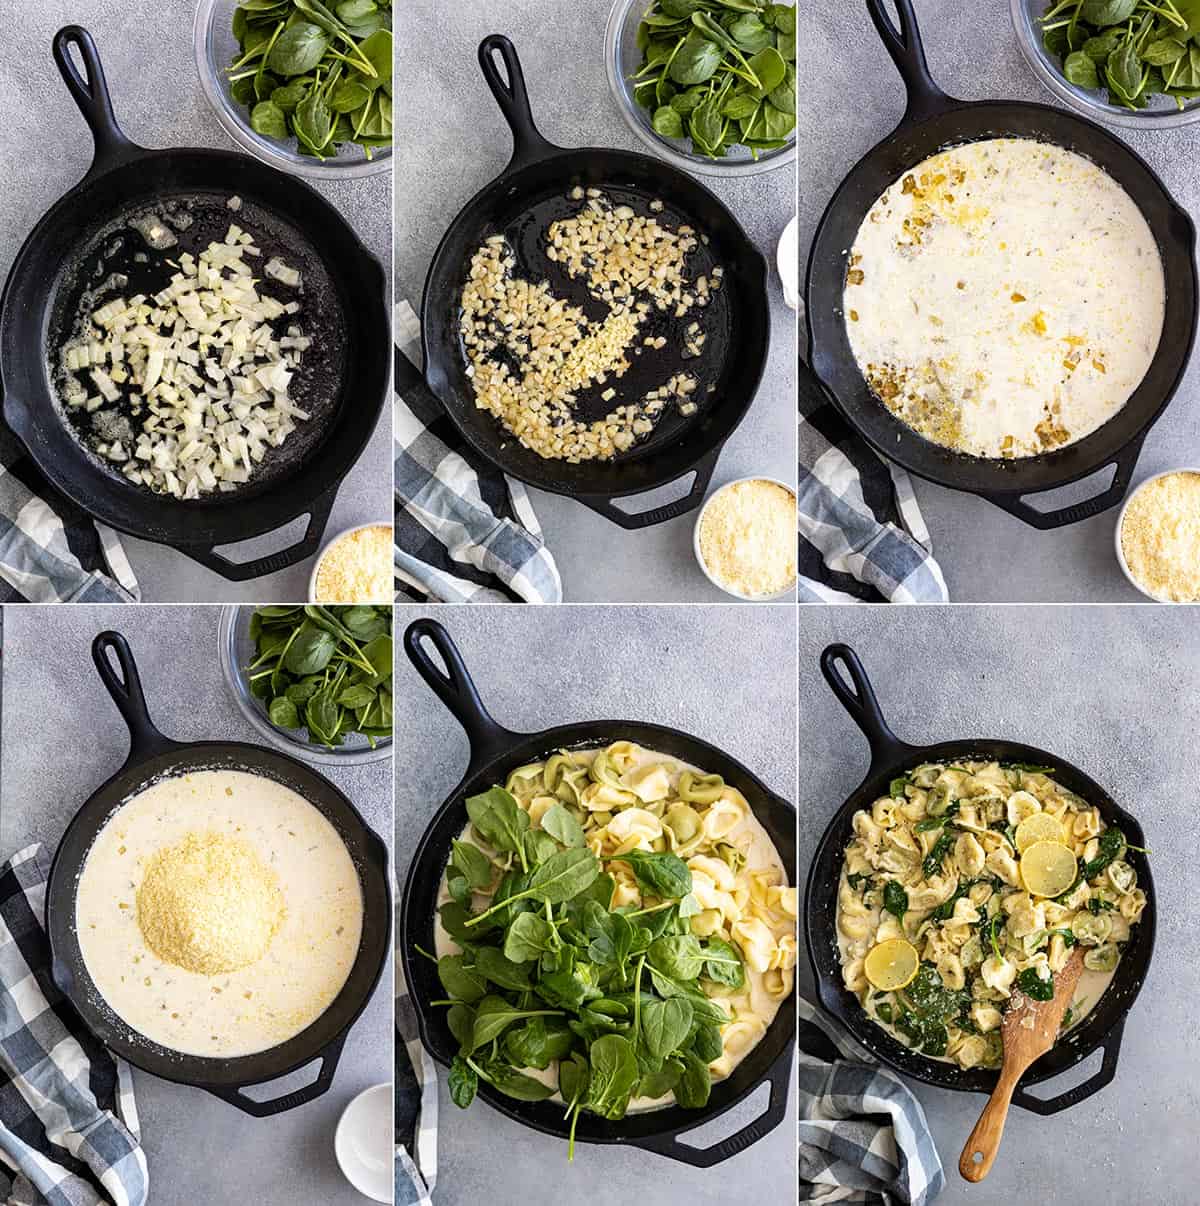 Six photos showing the how to make this tortellini recipe. Sauteing the onion, adding the garlic, adding the cream and pasta water, adding the cheese, adding the spinach, and the finished product. 